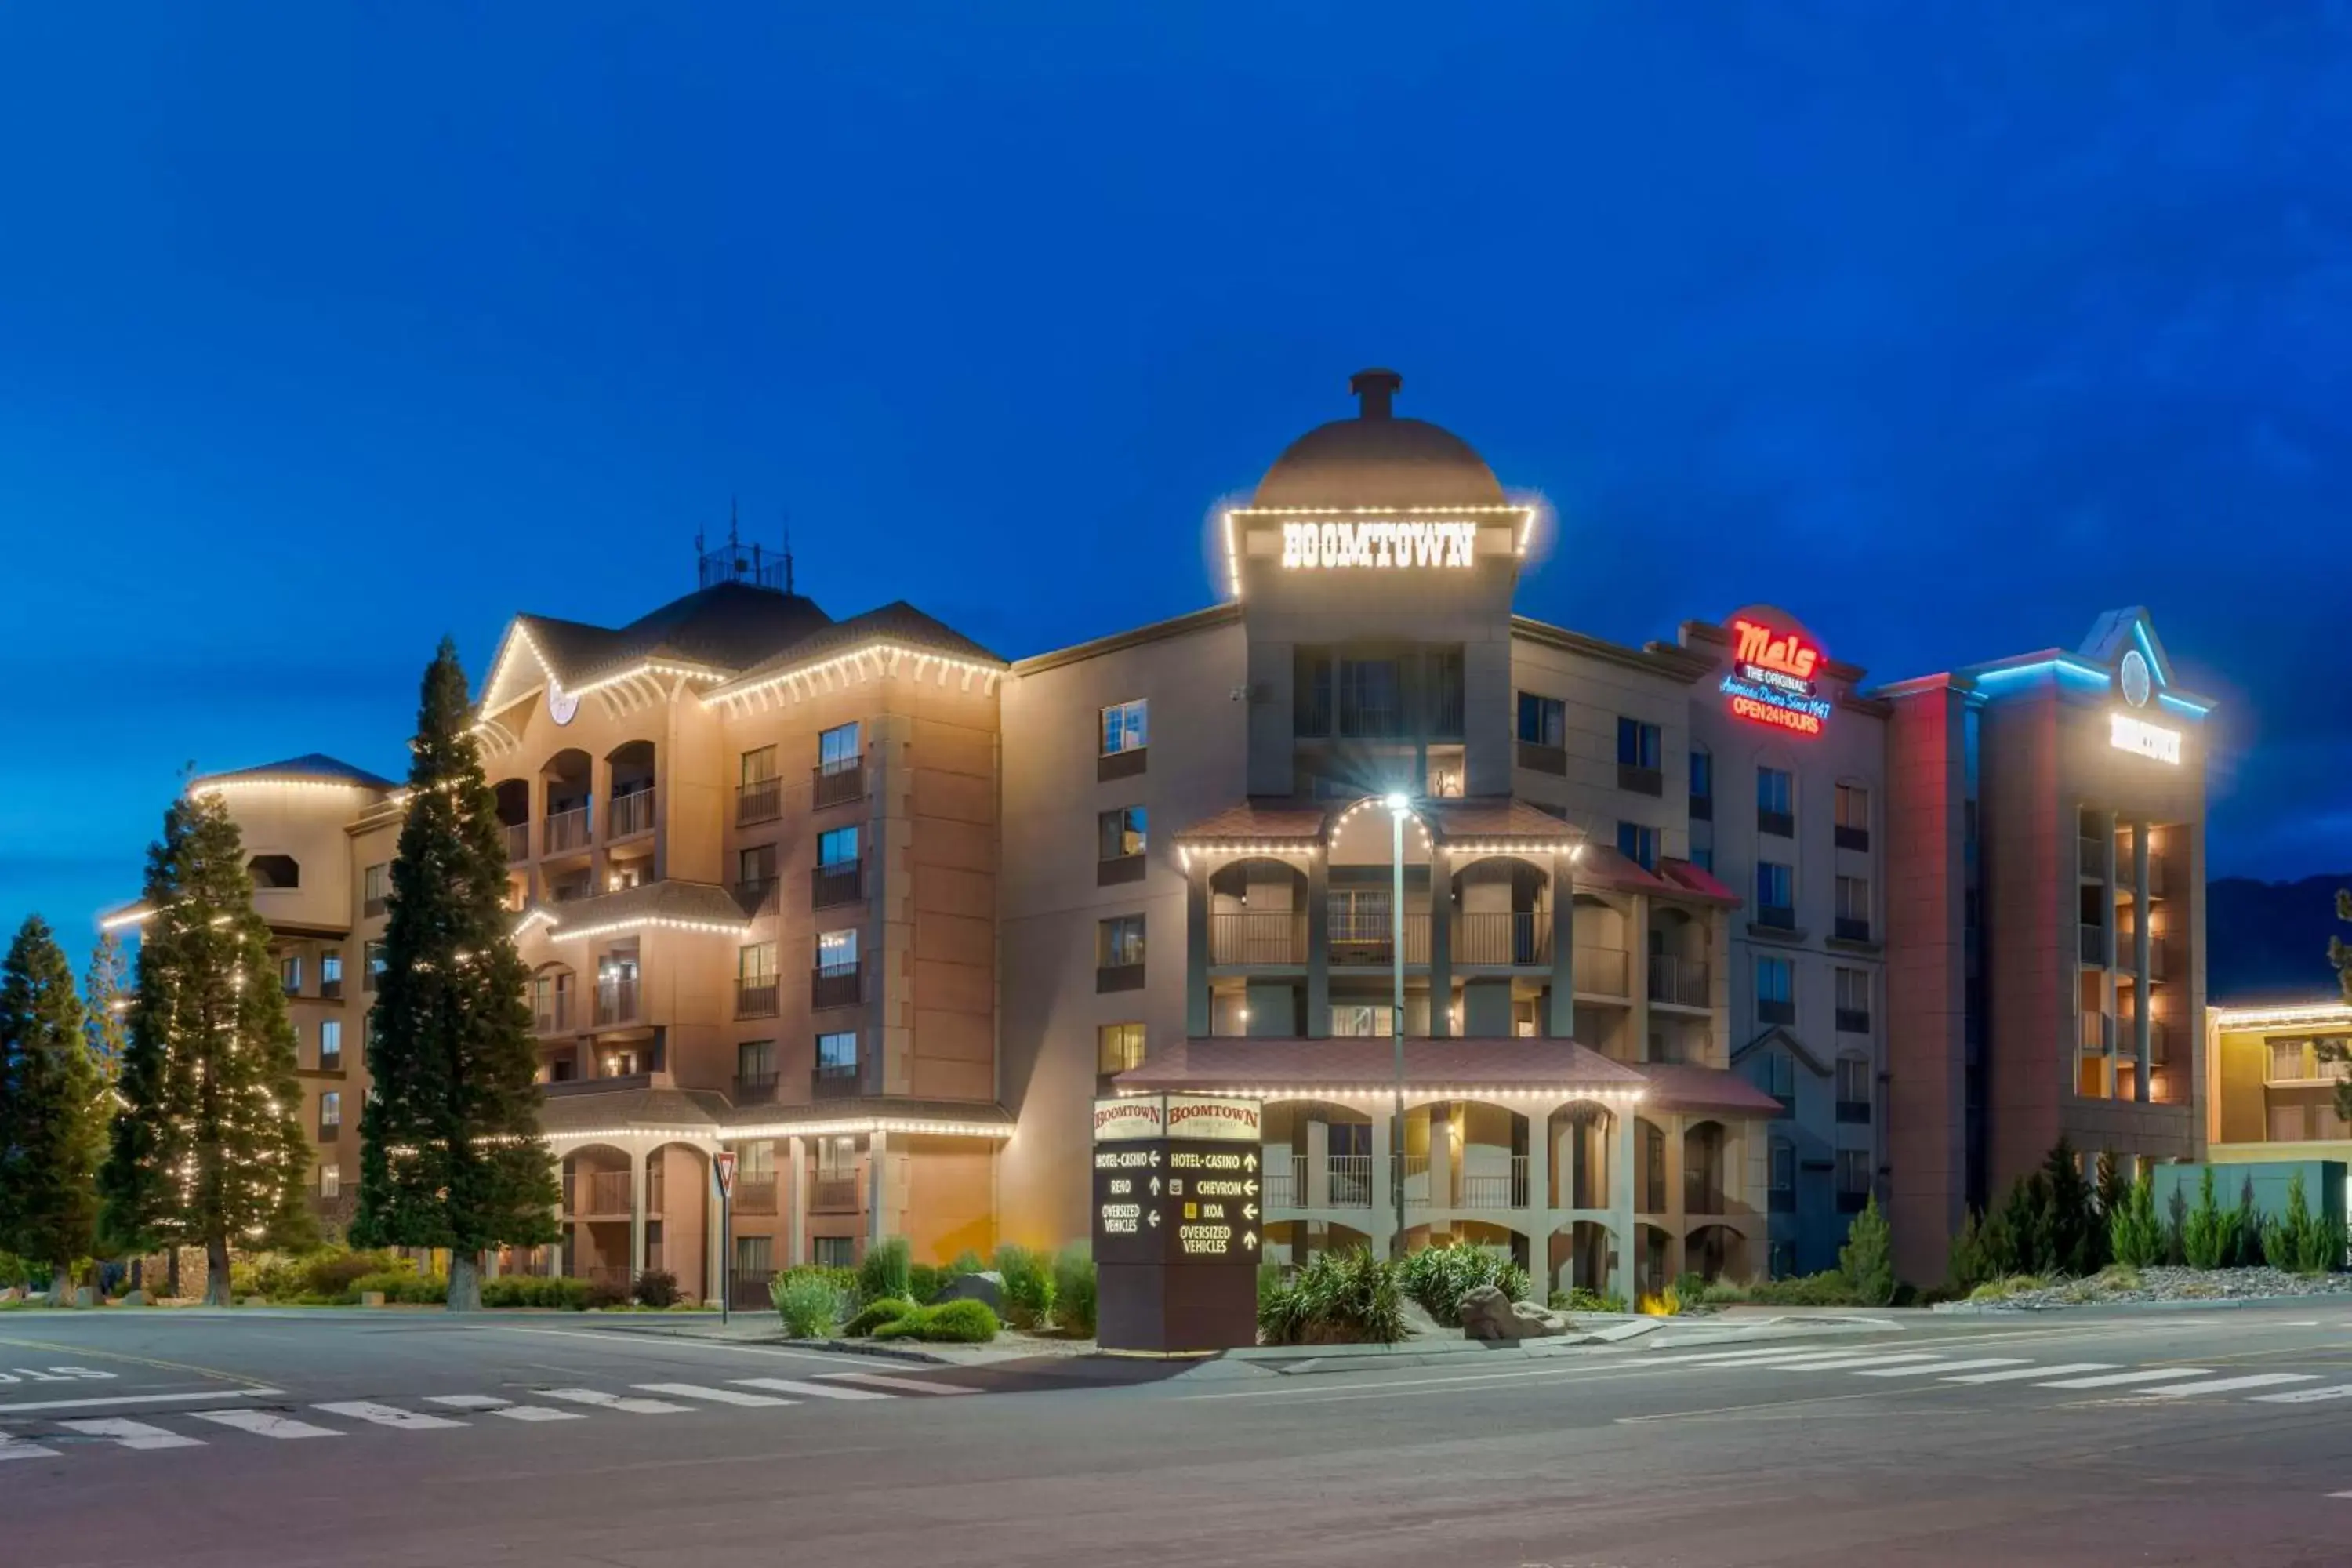 Property Building in Best Western Plus Boomtown Casino Hotel